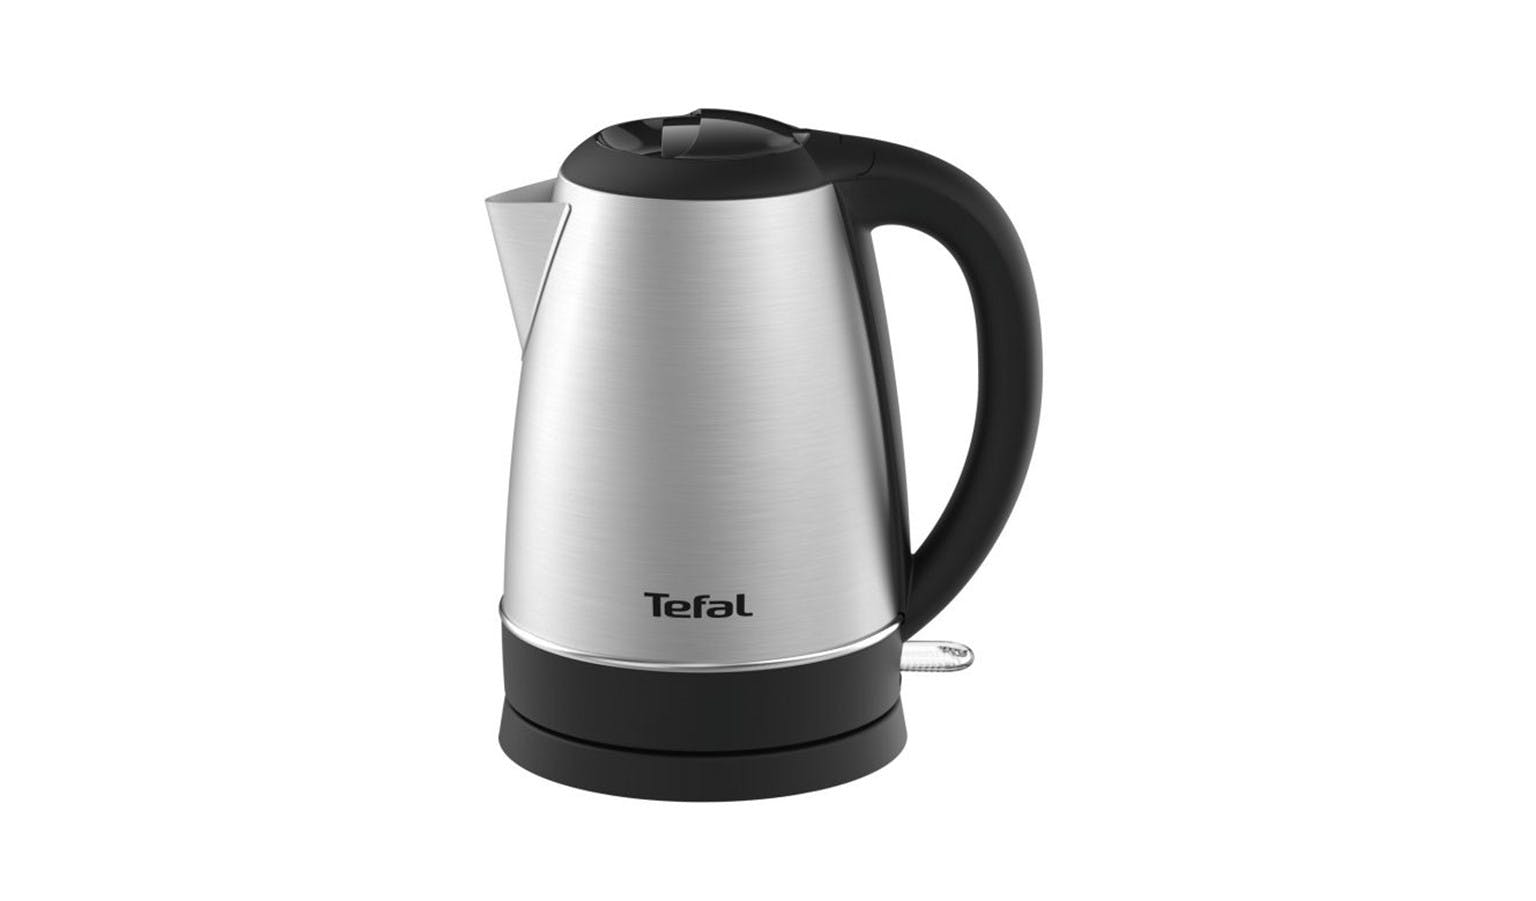 https://hnsgsfp.imgix.net/4/images/detailed/42/Tefal_KI800_1.7L_Handy_Kettle_Stainless_Steel-01.jpg?fit=fill&bg=0FFF&w=1536&h=901&auto=format,compress